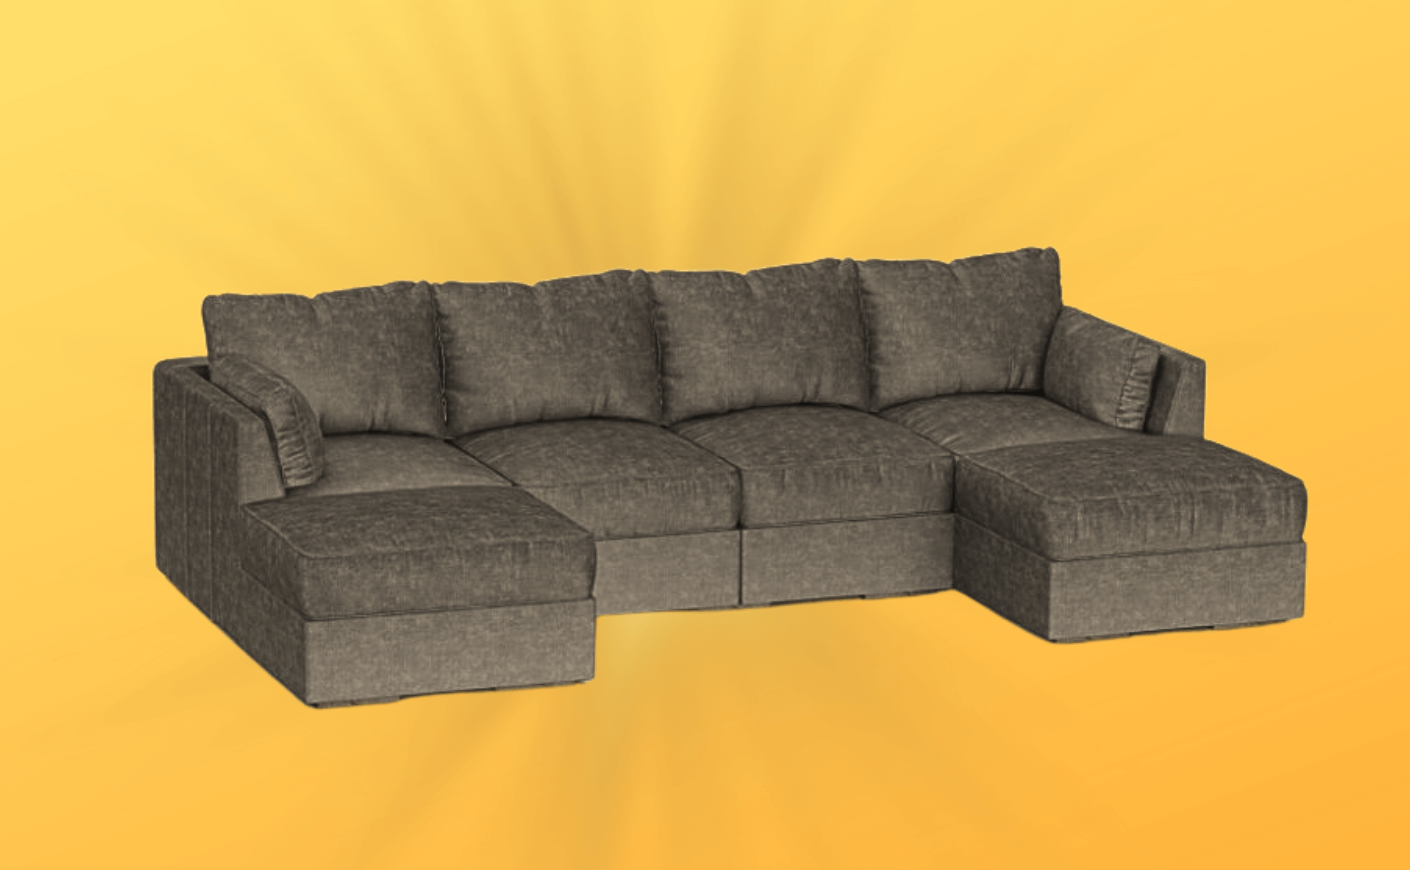 Love Your Couch, Hate Your Cushions? Here's What You Need to Know